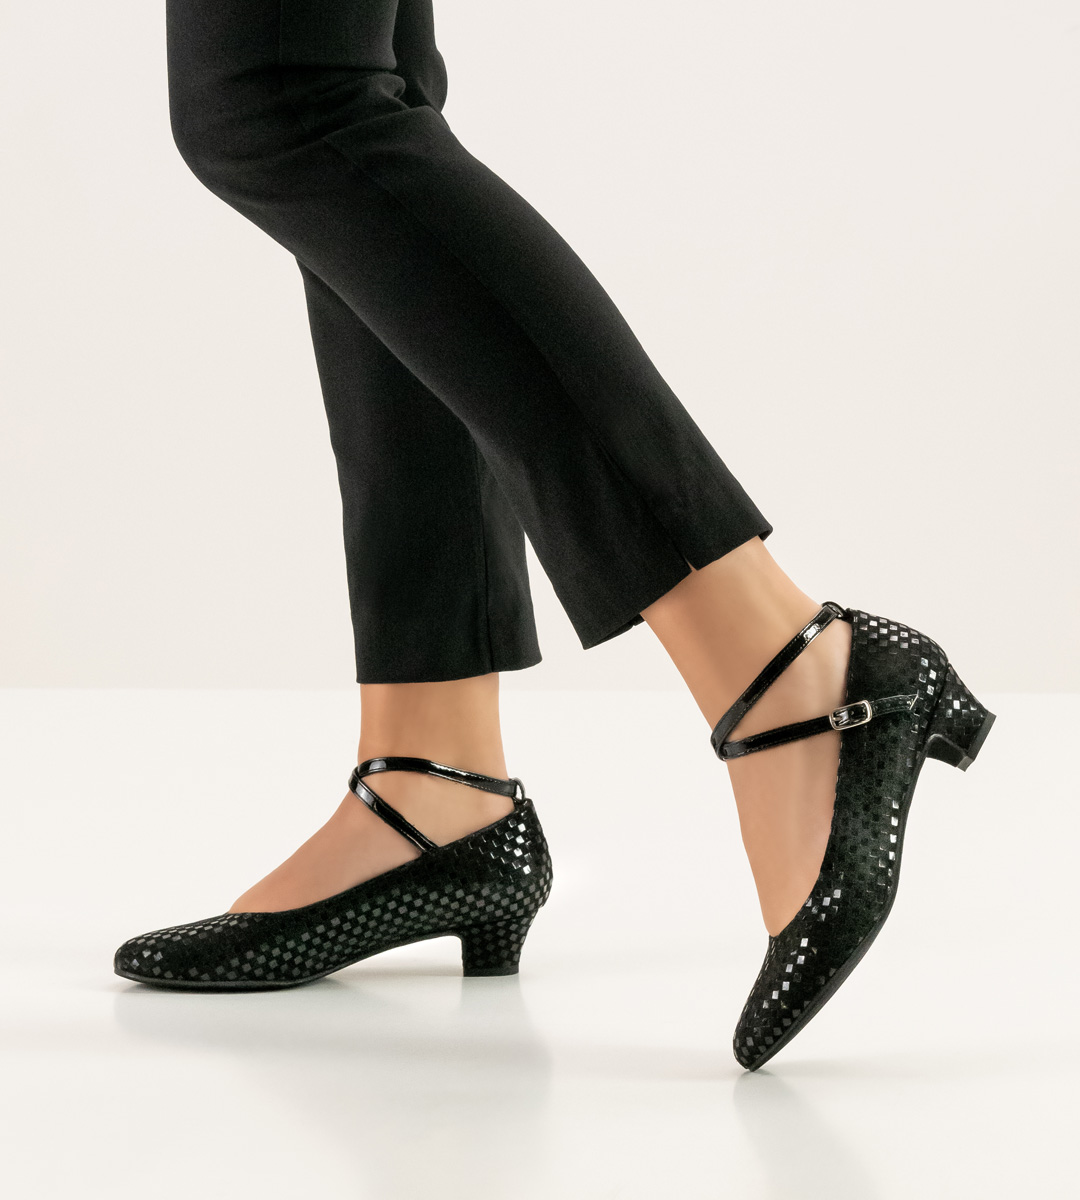 Werner Kern ladies' dance shoe in black combined with black trousers